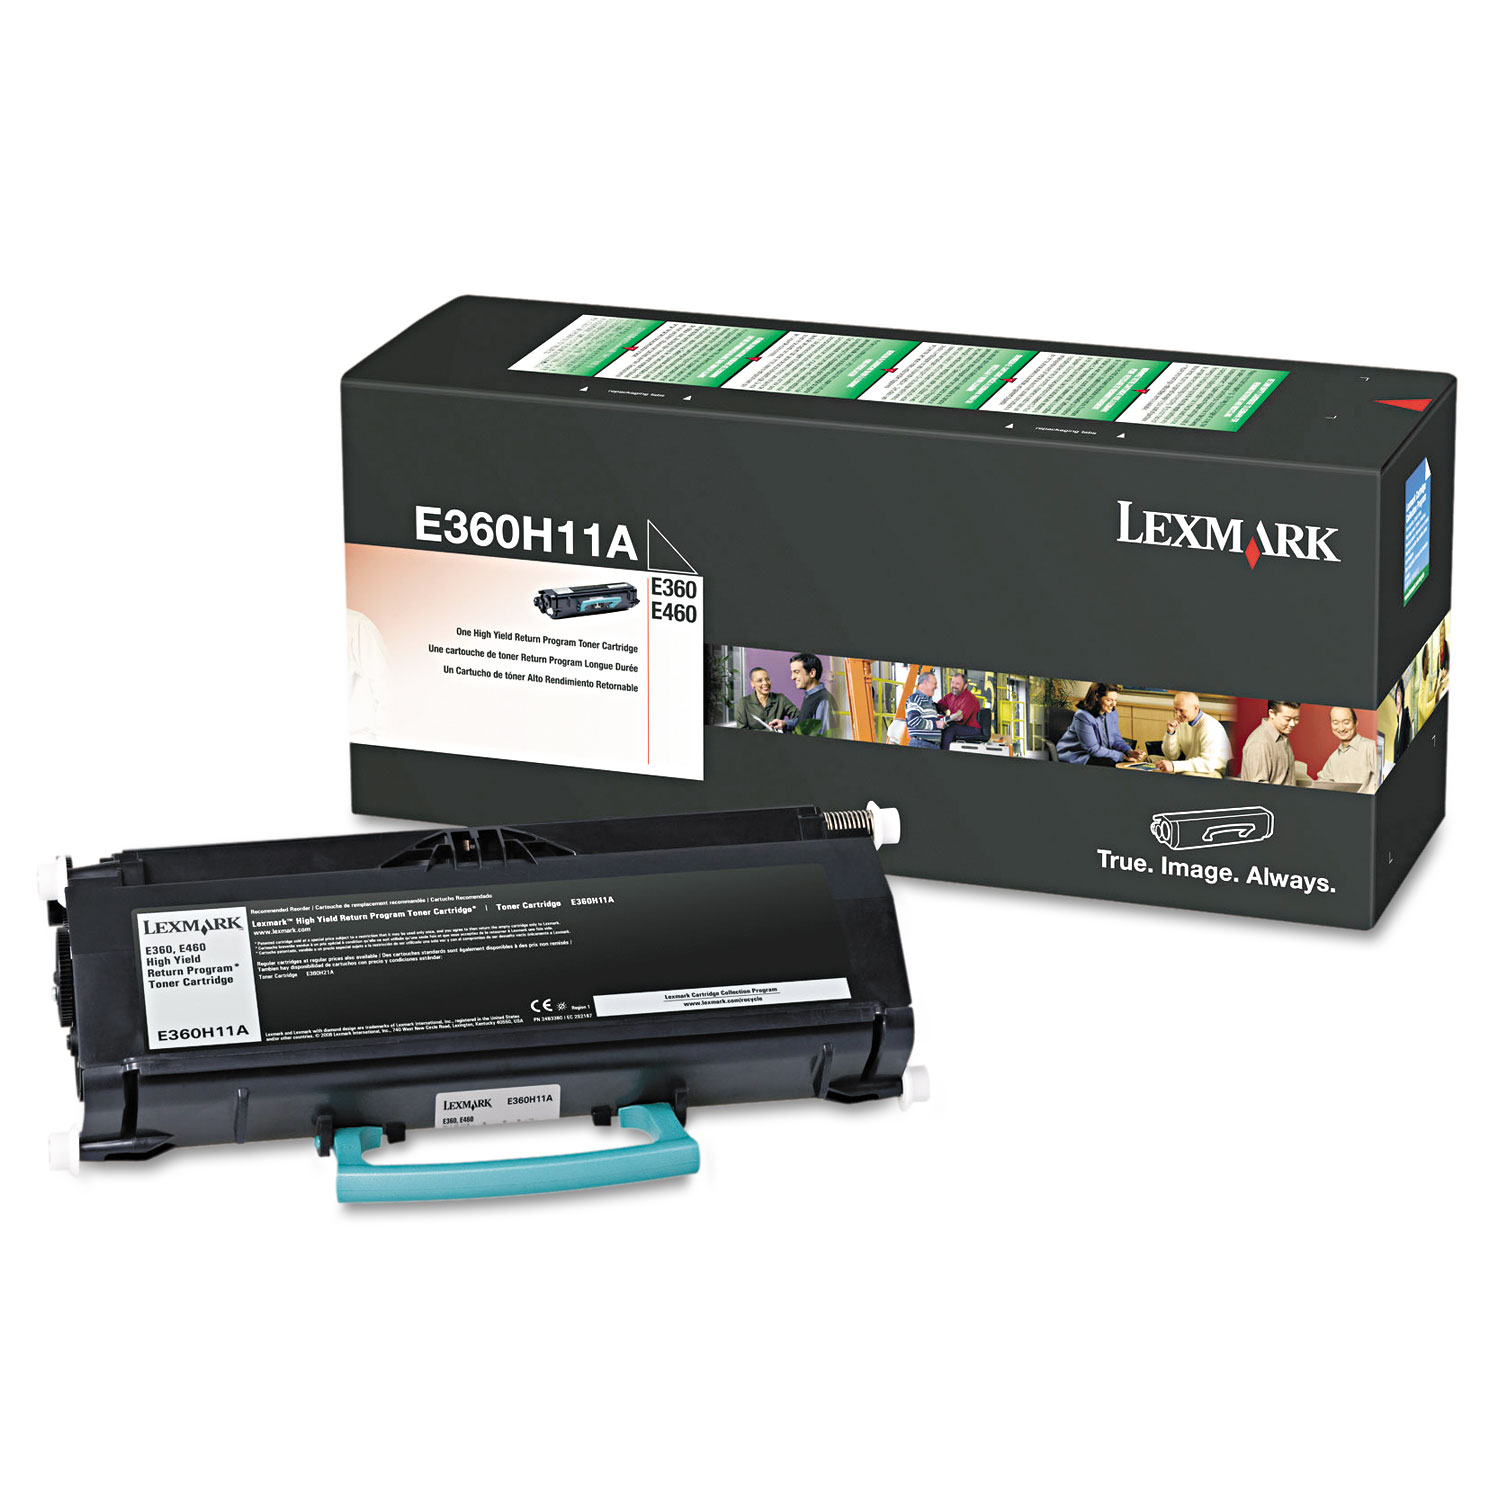  Lexmark E360H11A E360H11A (E360/E46x) Return Program High-Yield Toner, 9000 Page-Yield, Black (LEXE360H11A) 